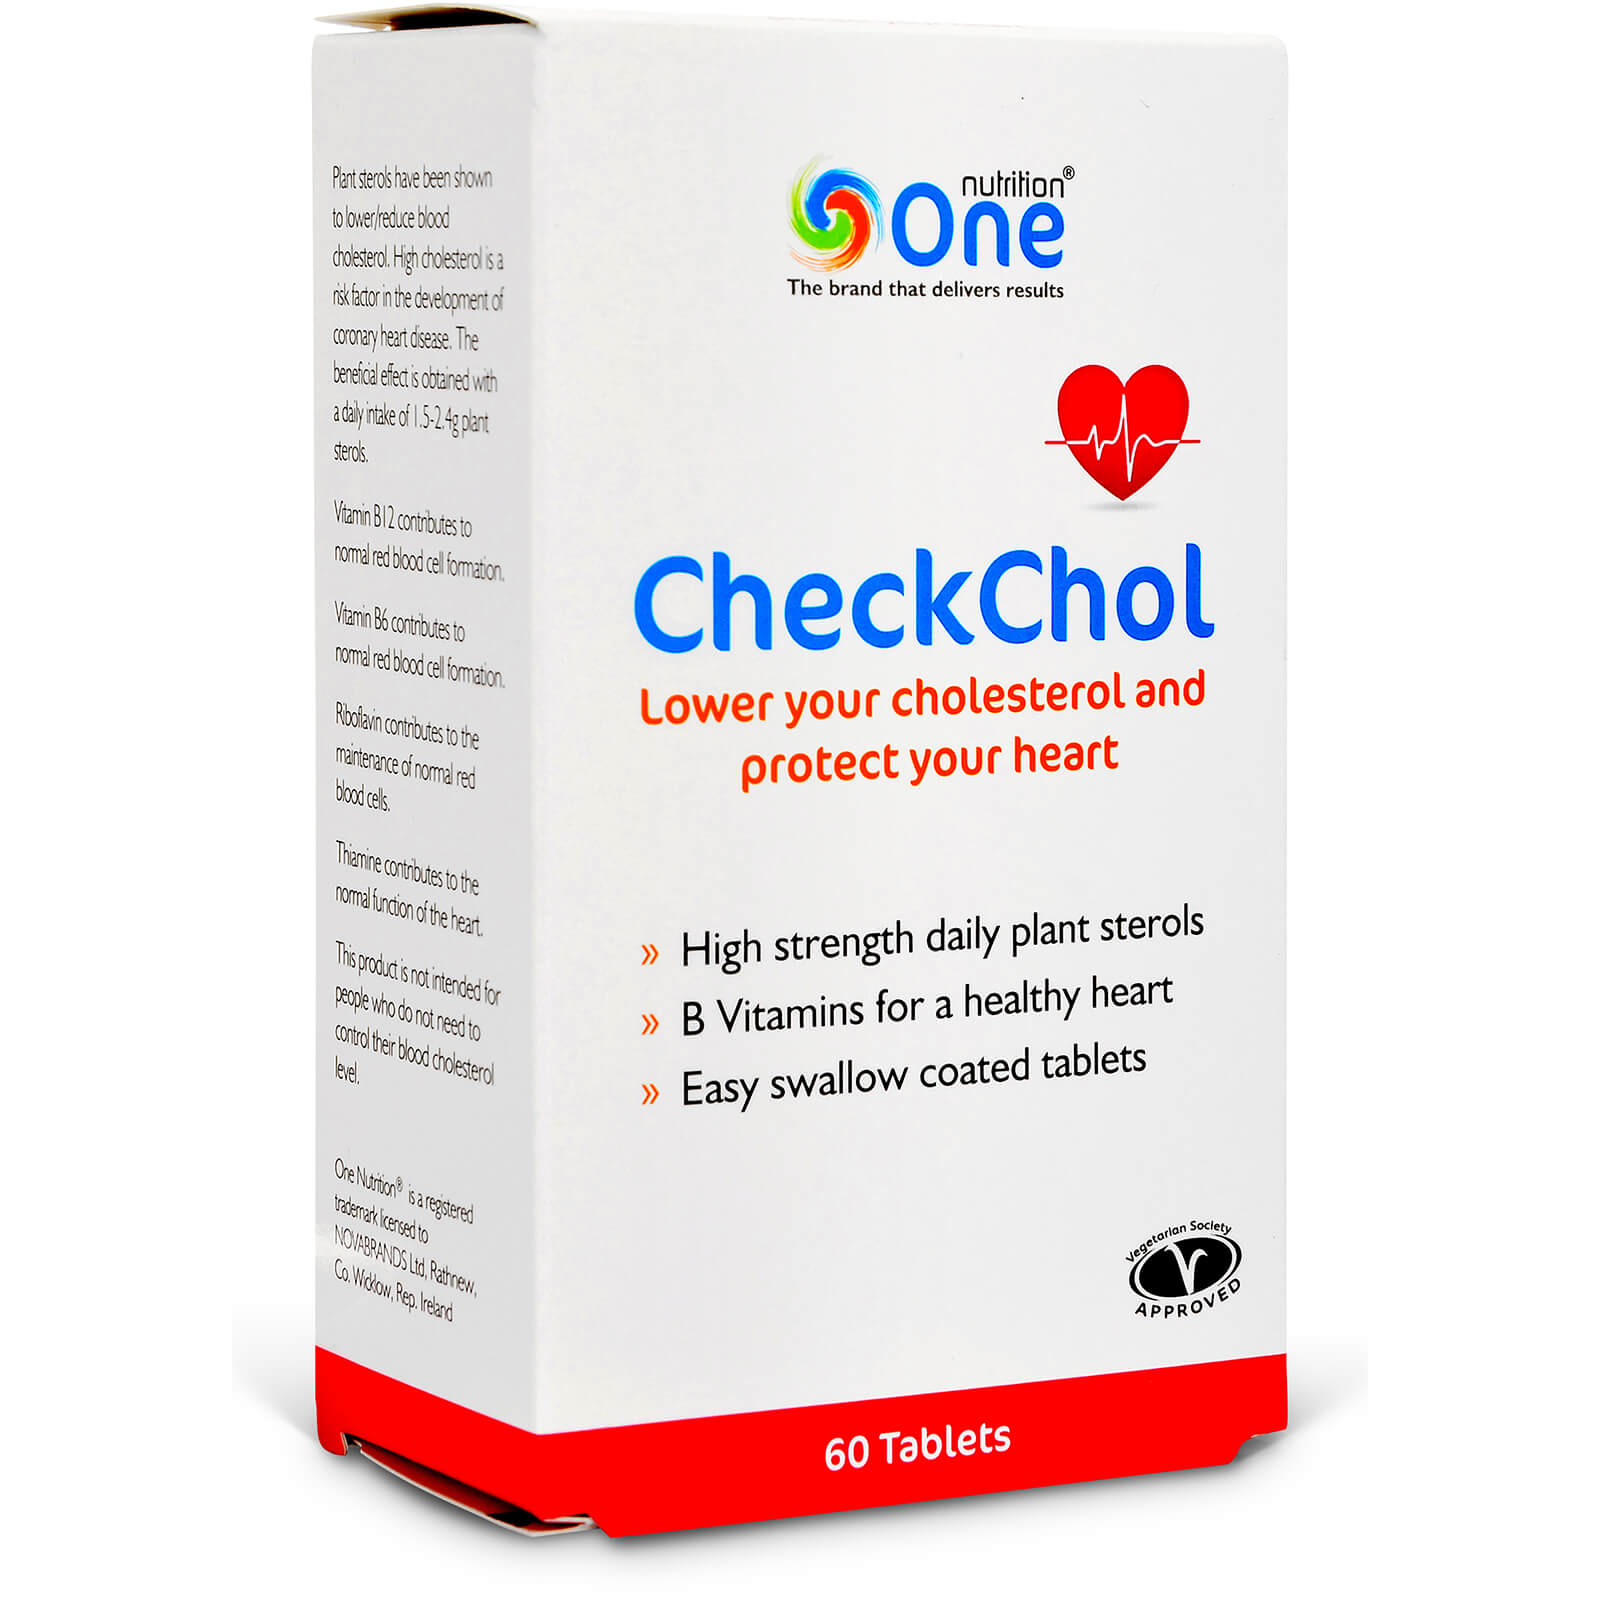 CheckChol Lower Your Cholesterol and Protect Your Heart - 60 Tablets